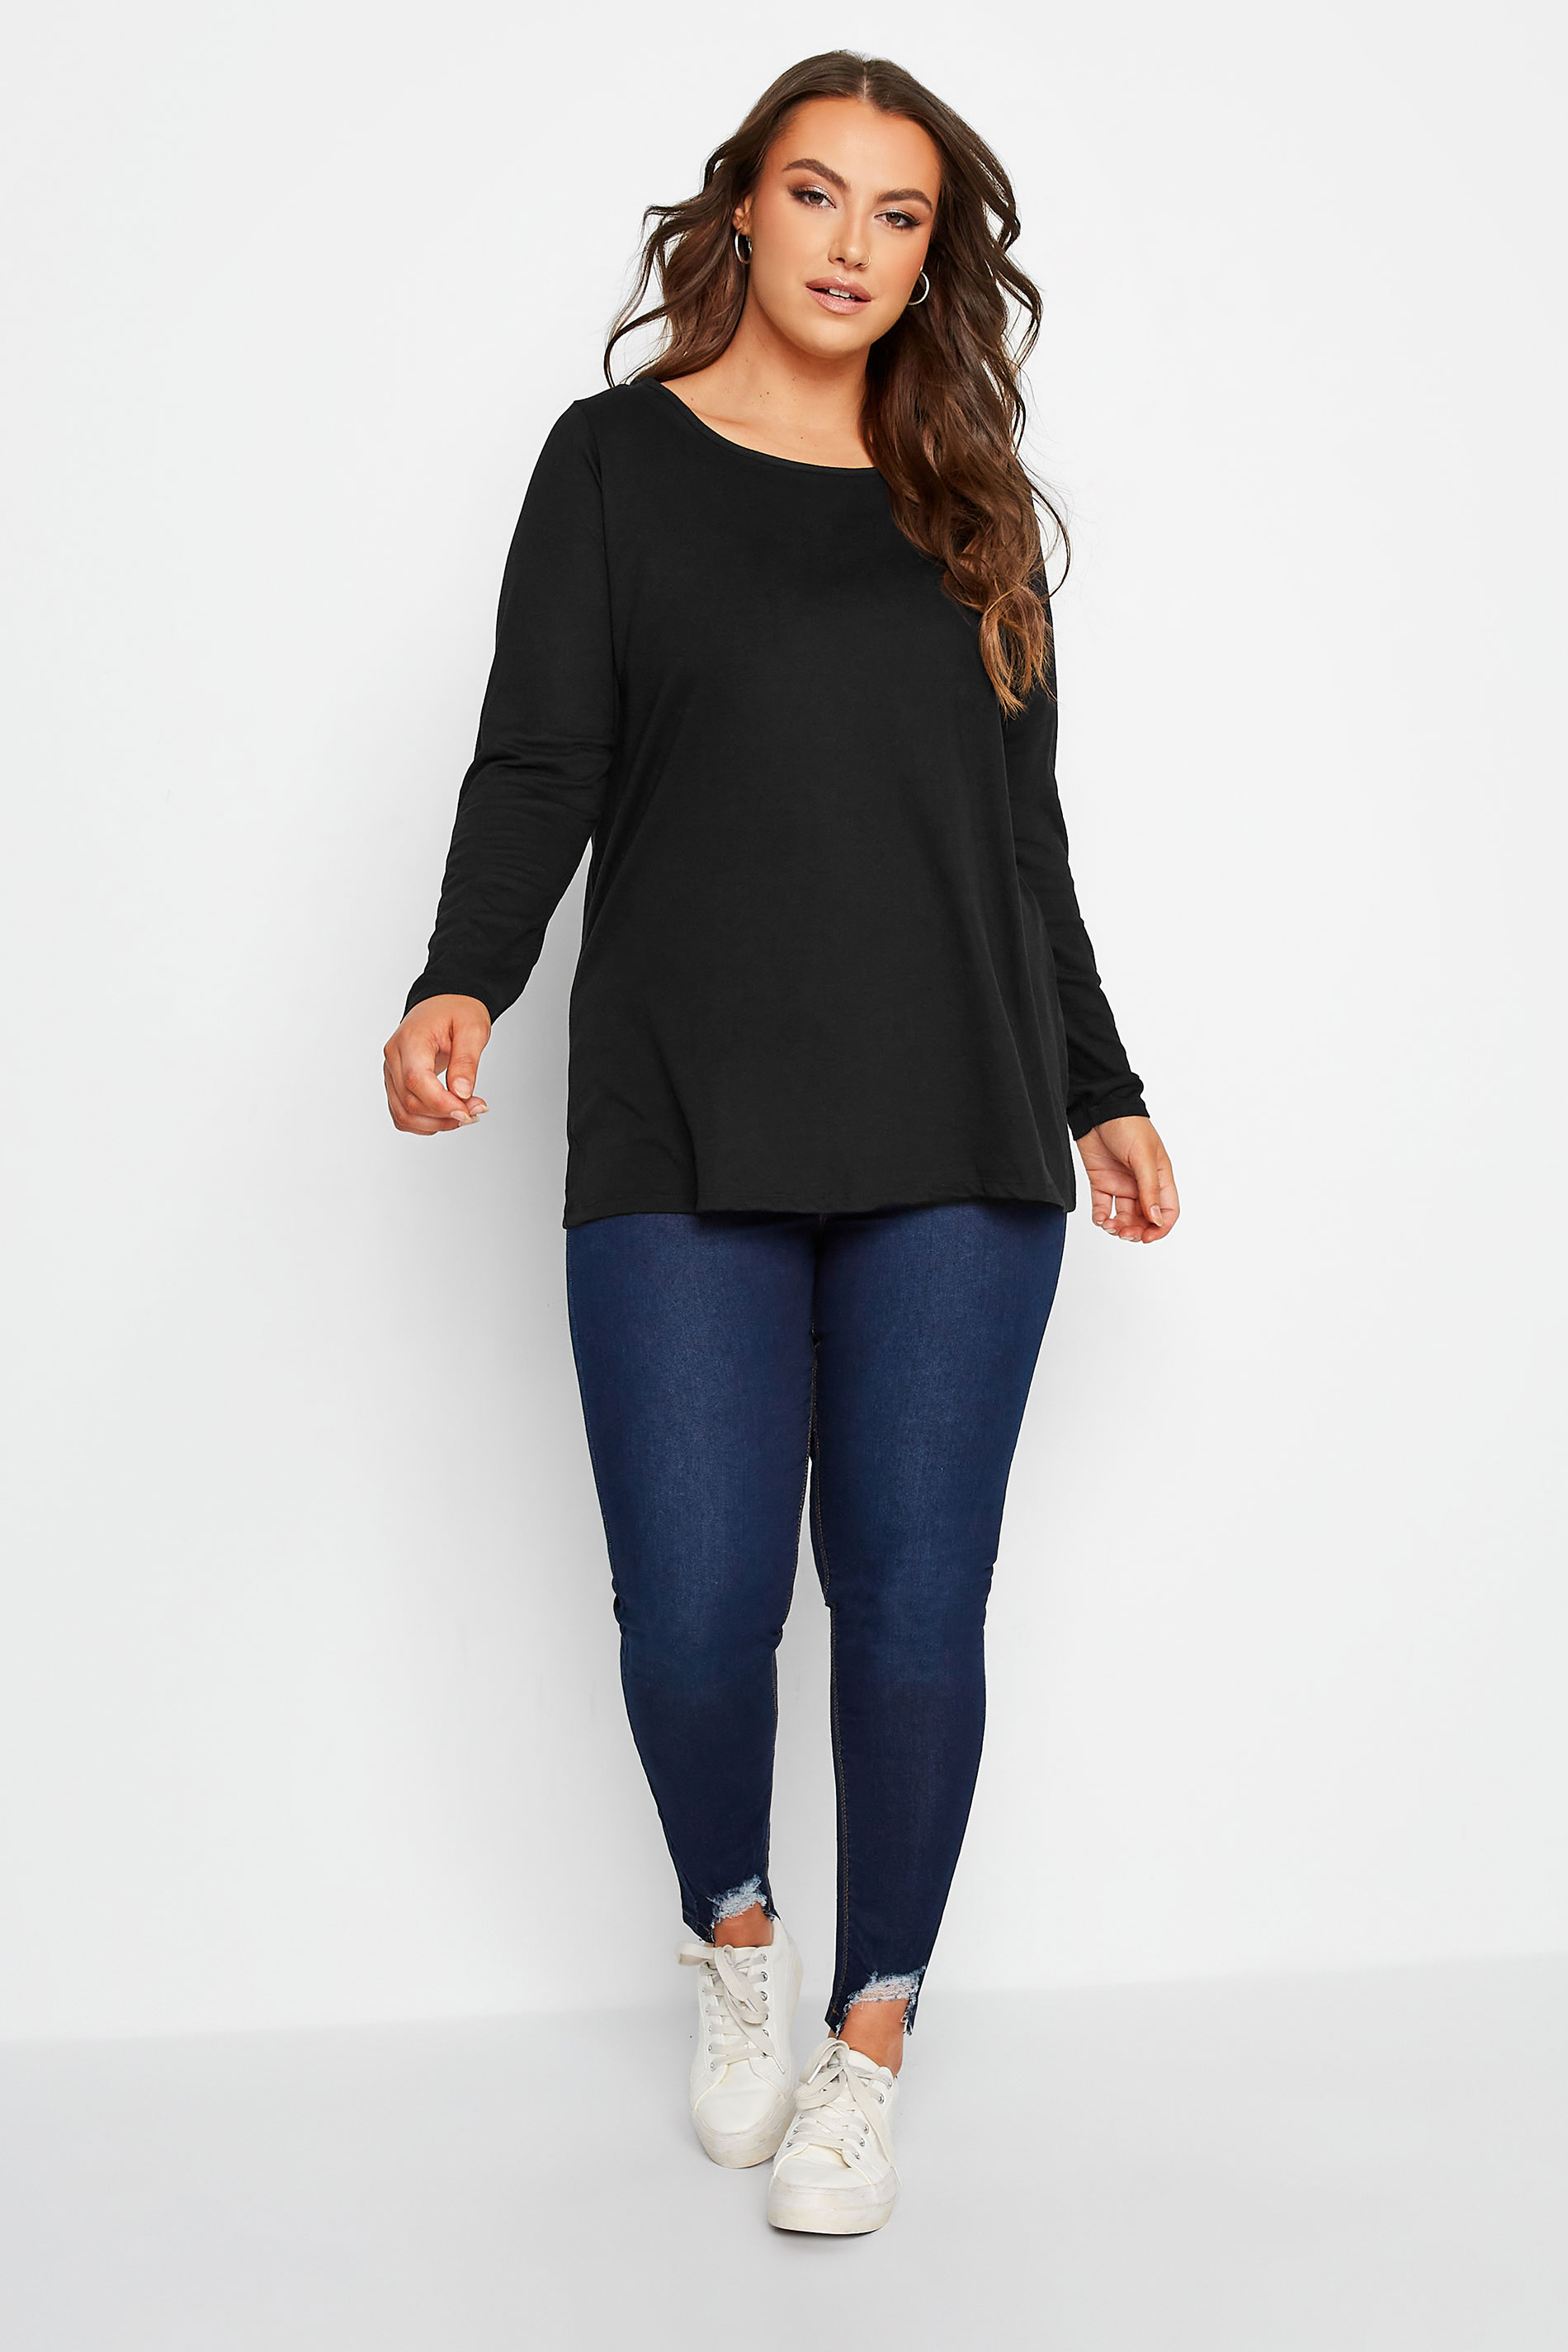 3 PACK Plus Size Black & Blue Long Sleeve Tops | Yours Clothing